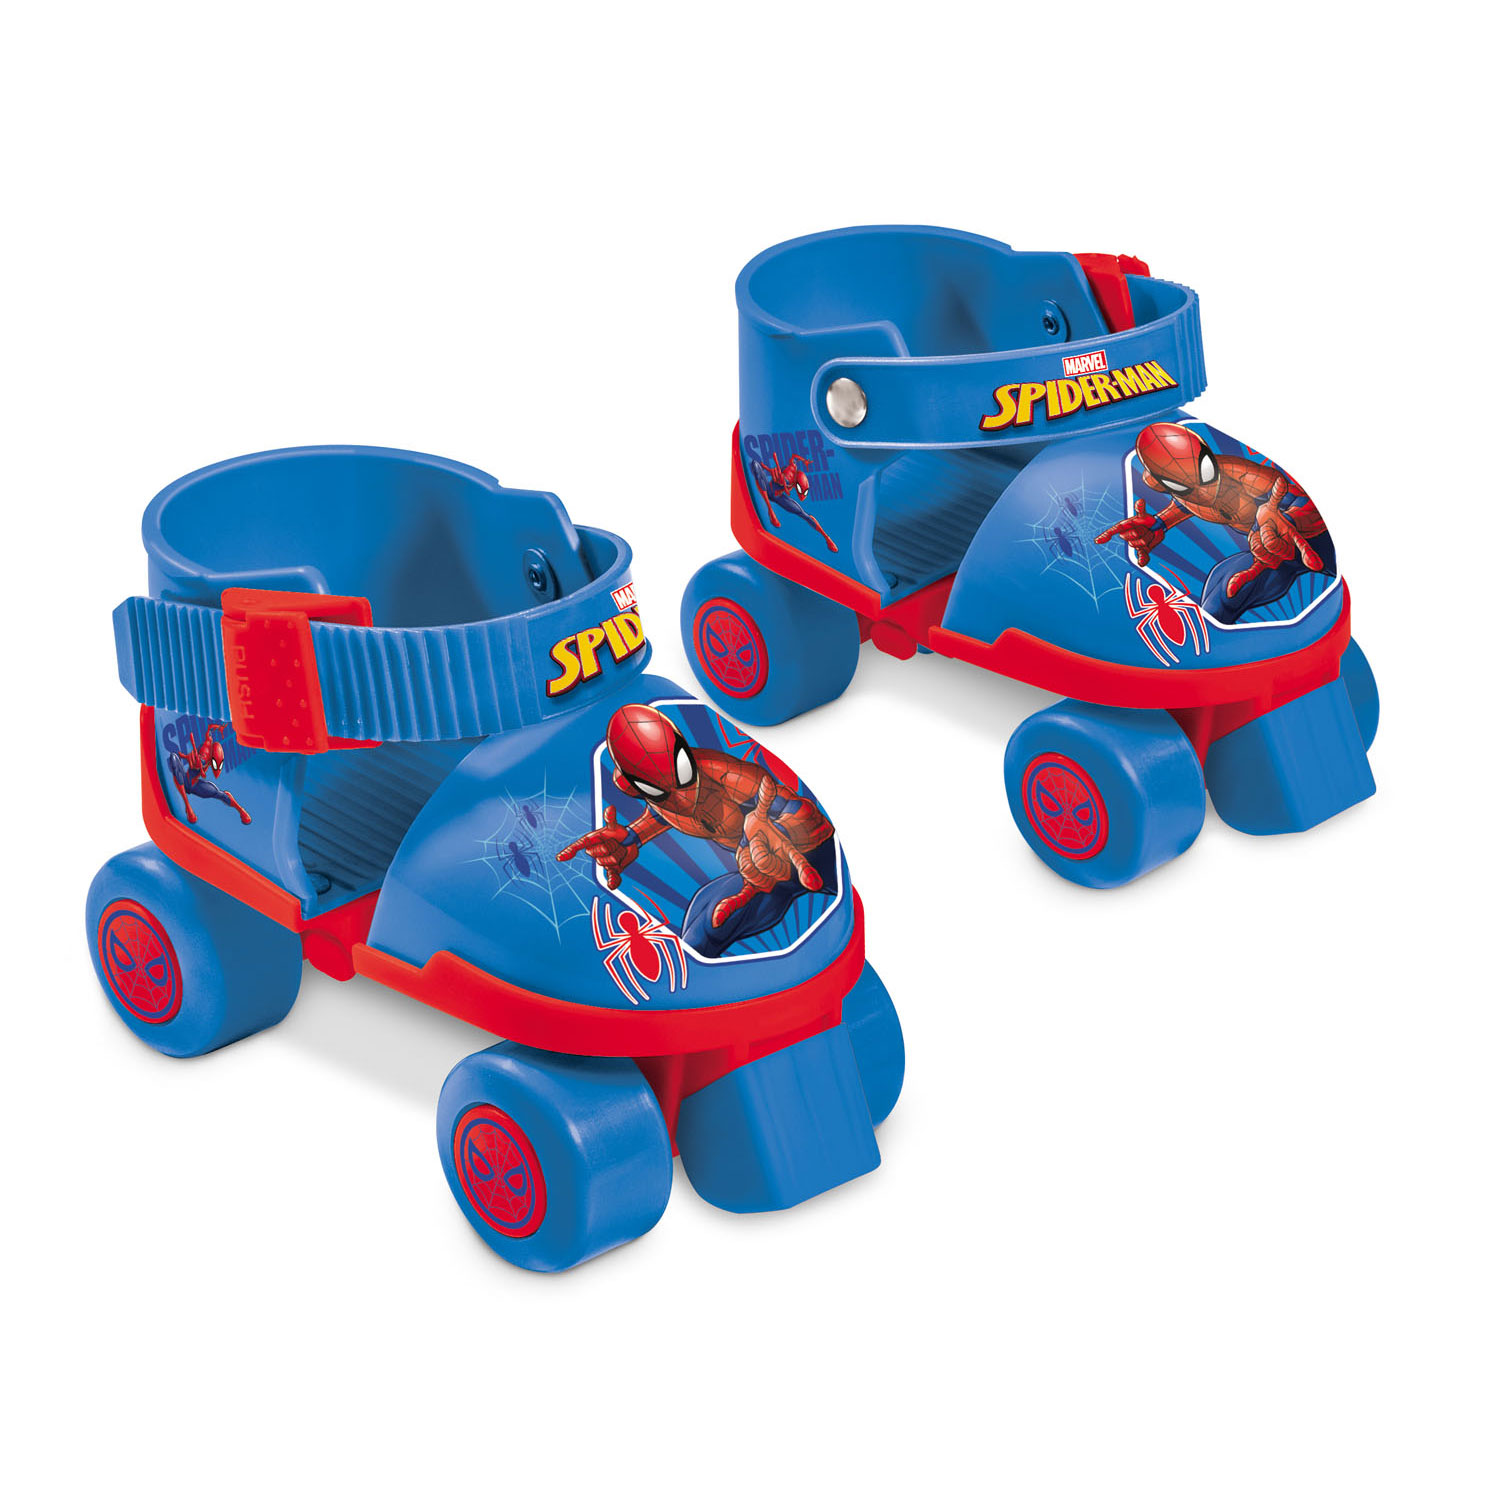 Spiderman Roller Skates with Protection Set, size 22-29